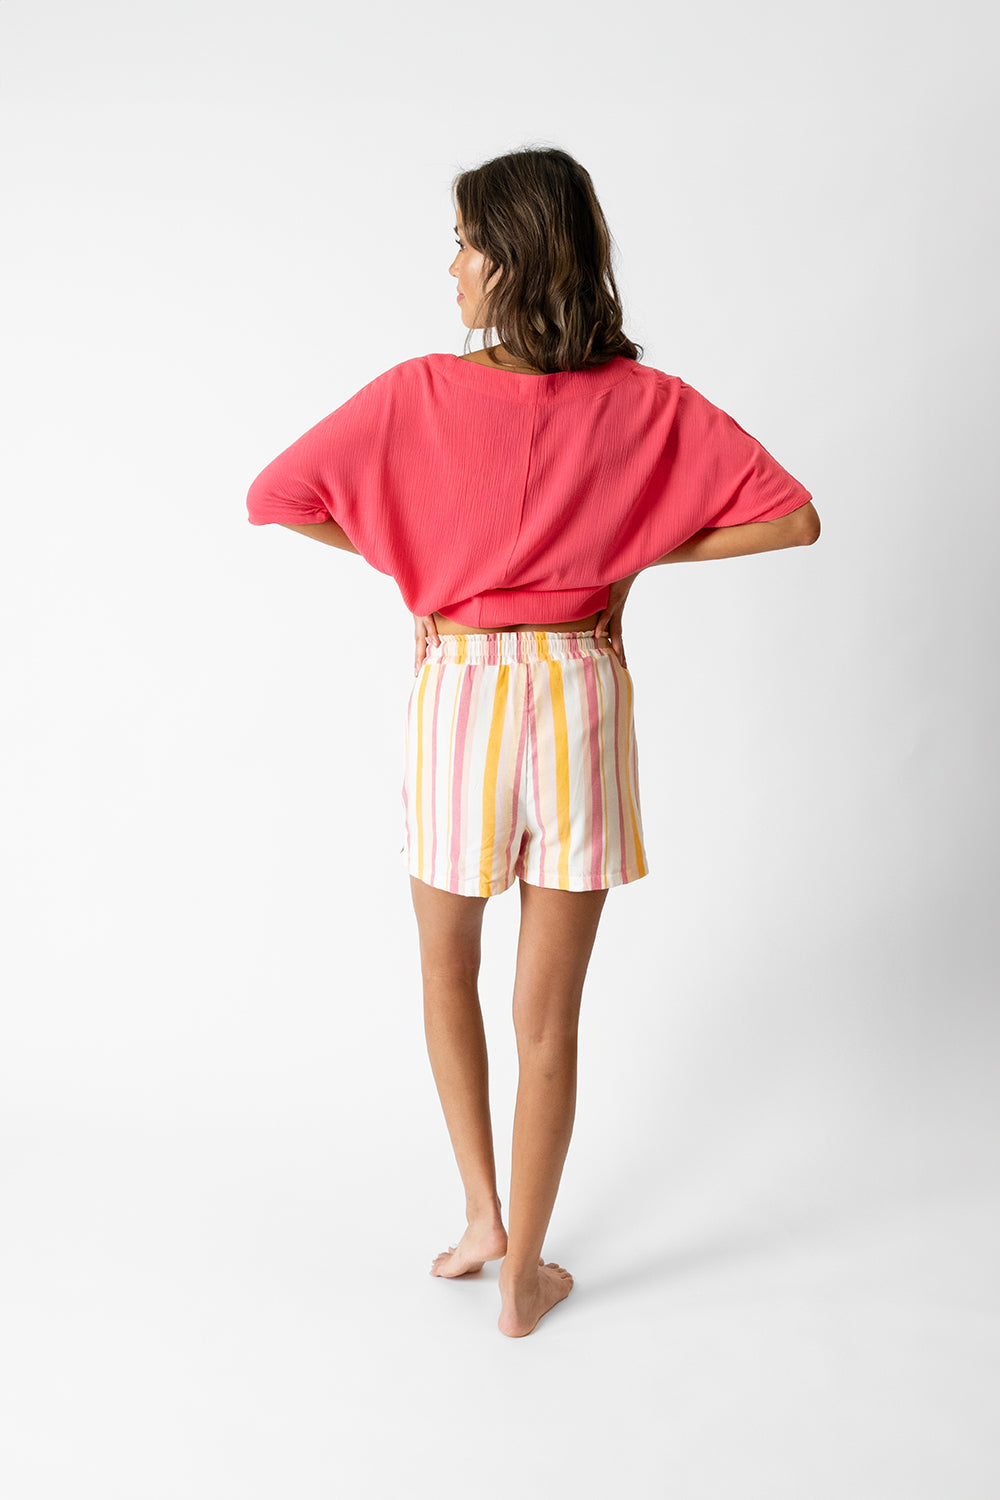 koy resort miami tie front blouse top in guava pink for spring 2024 women's fashion collection